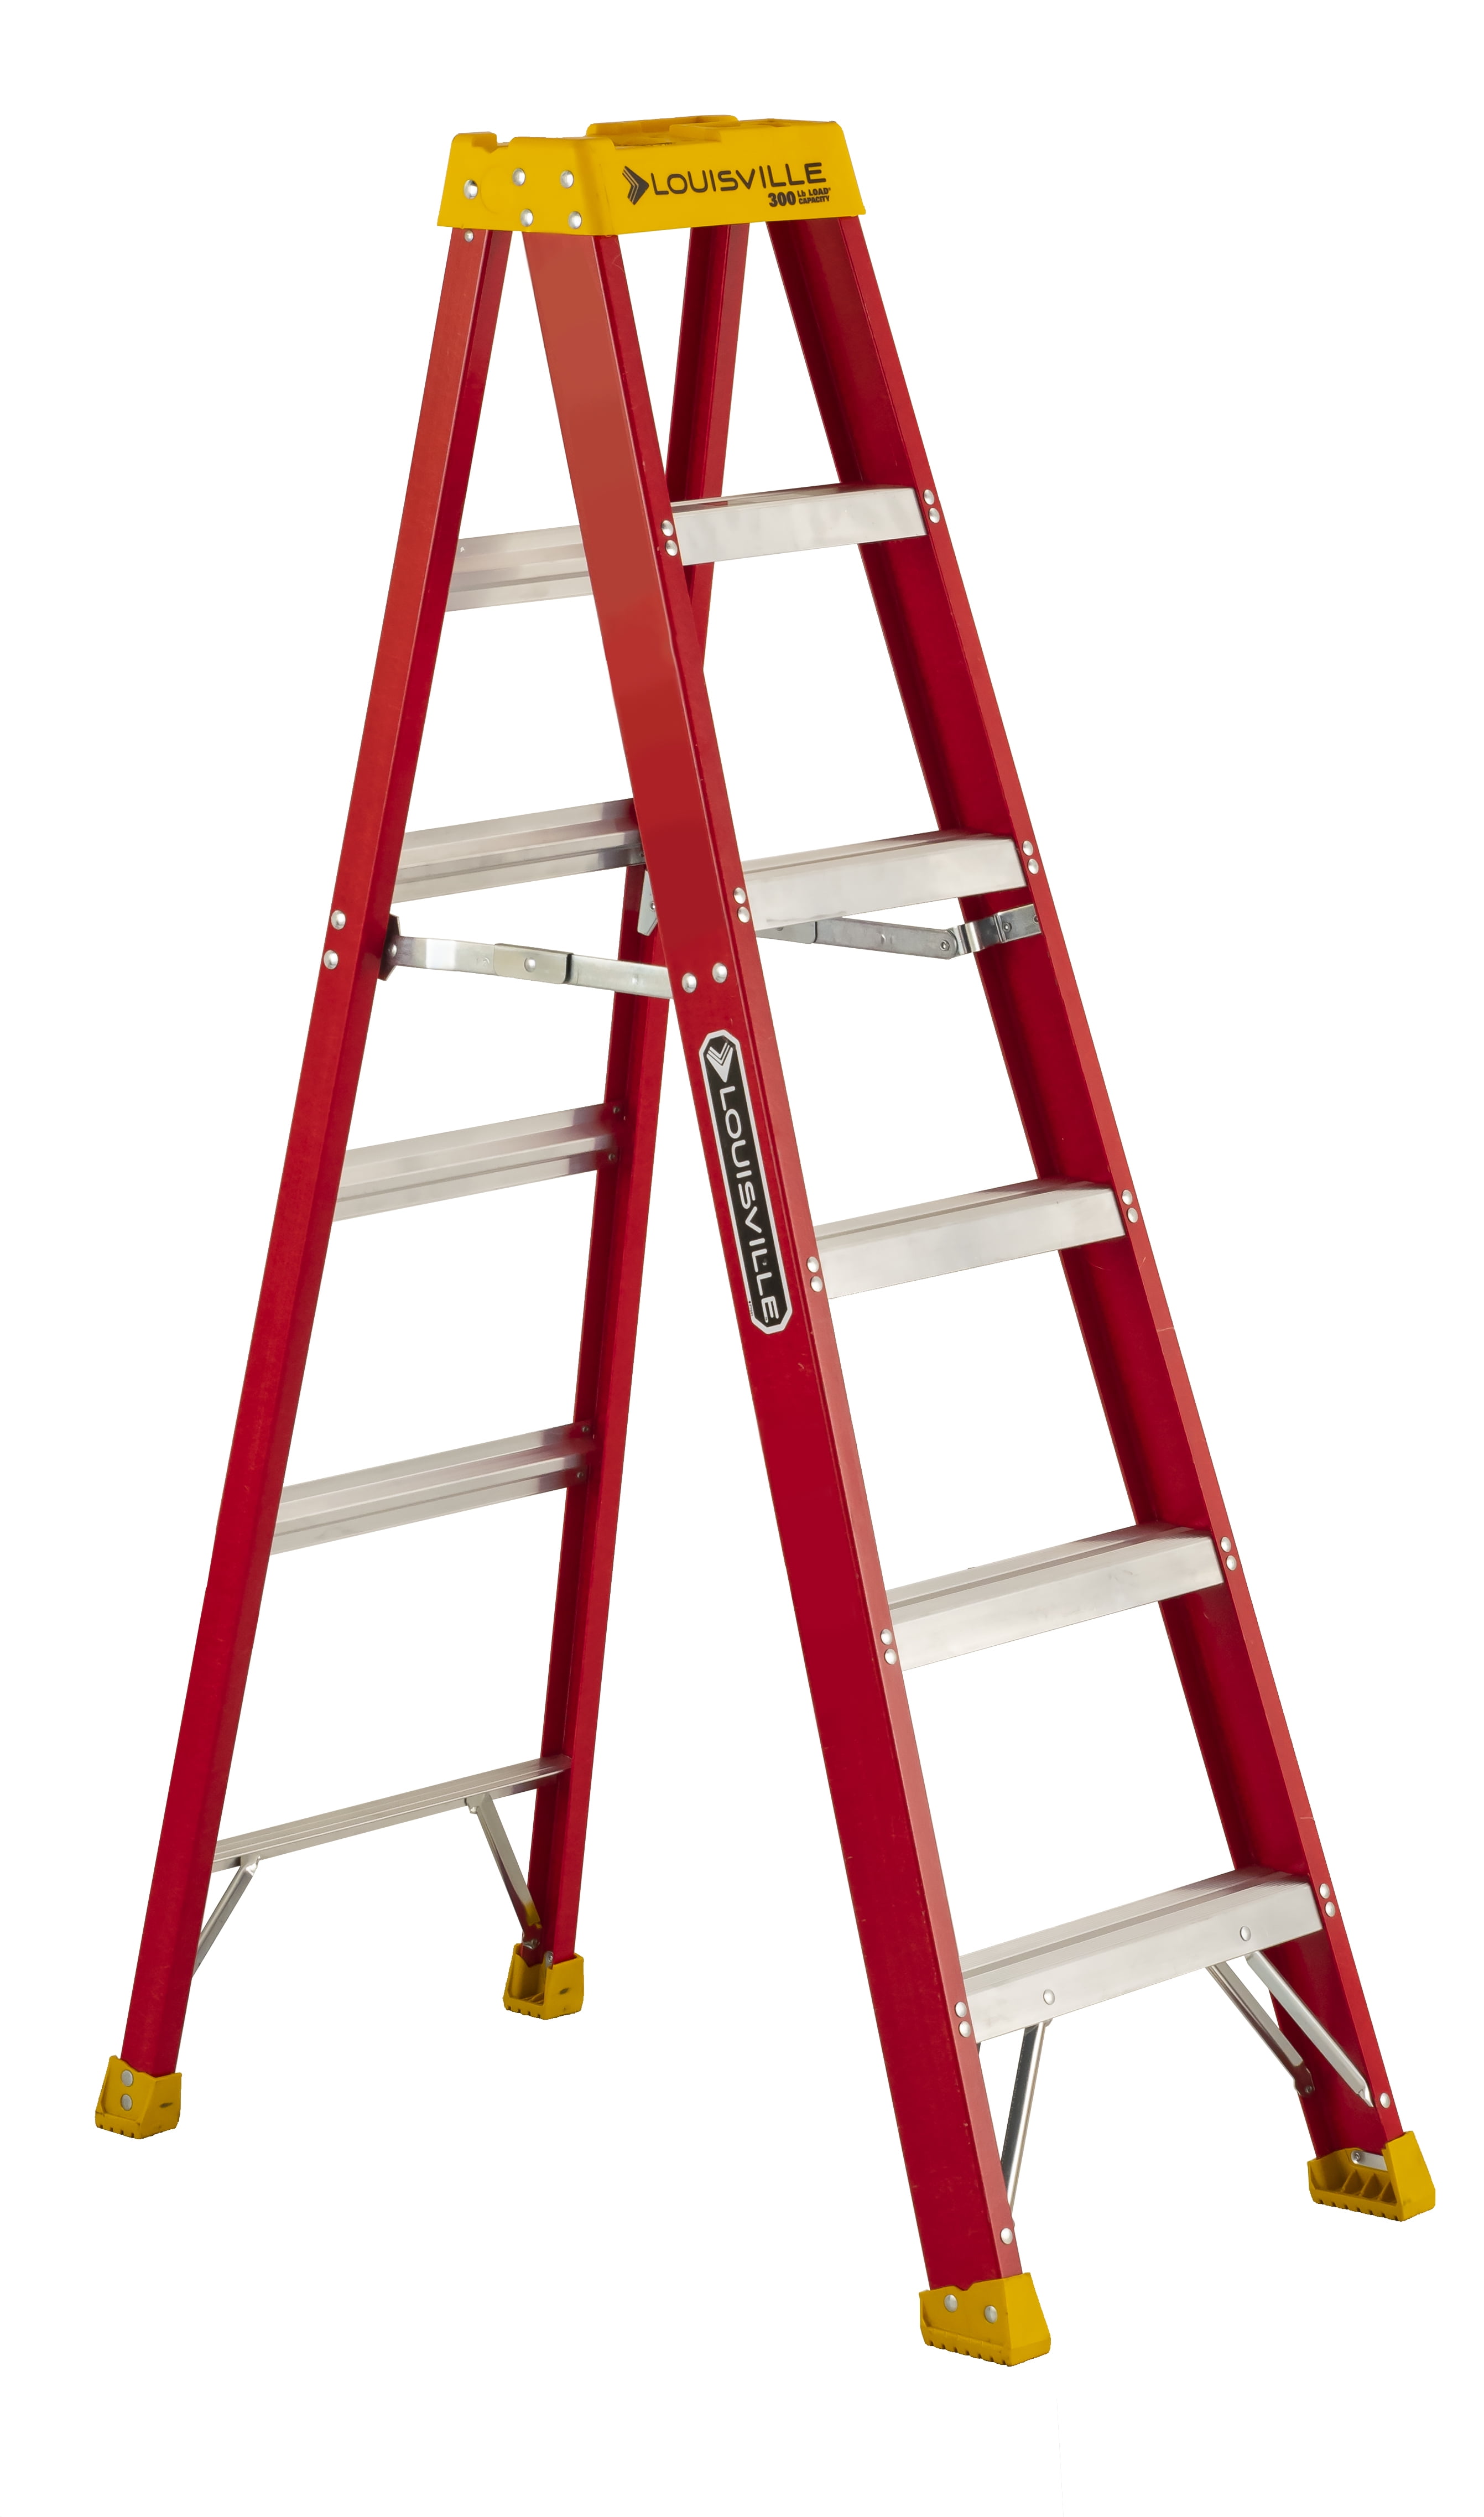 4 Foot Aluminum Step Ladder 250 Lbs Capacity Home Kitchen Living Bed Room Work for sale online 